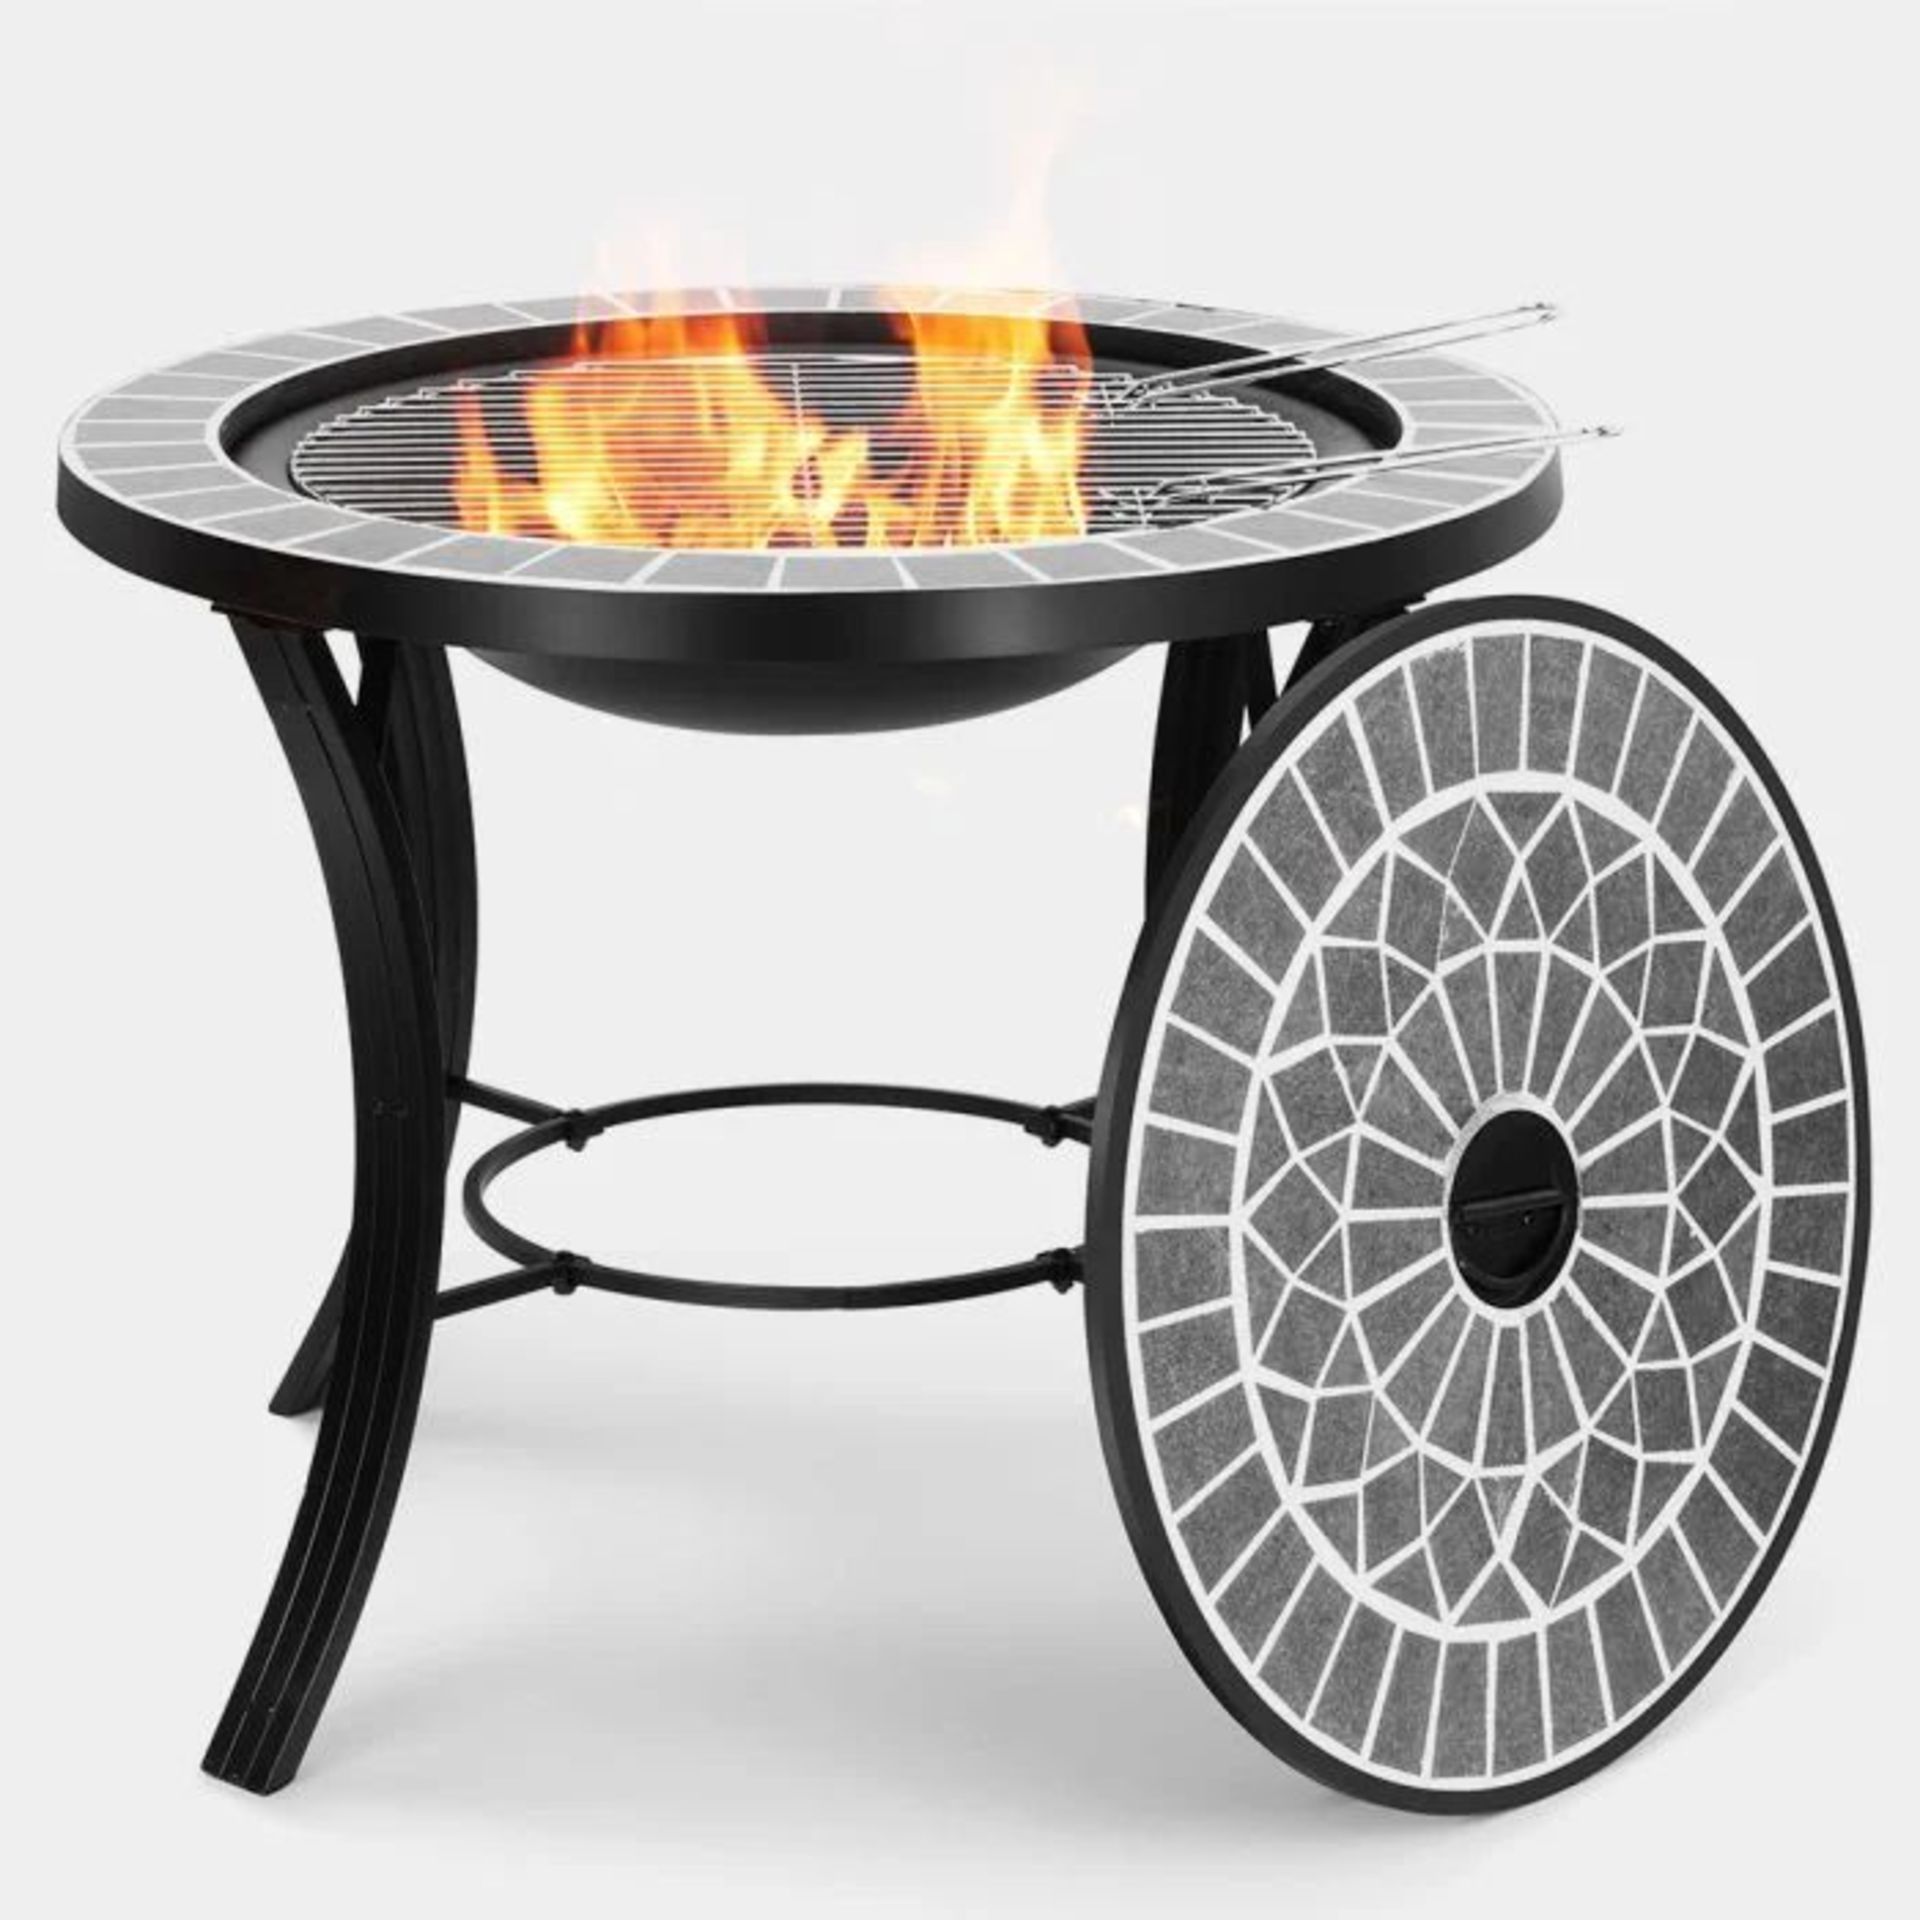 BRAND NEW MOSAIC FIRE PIT 2500166 RRP £199 R5-1